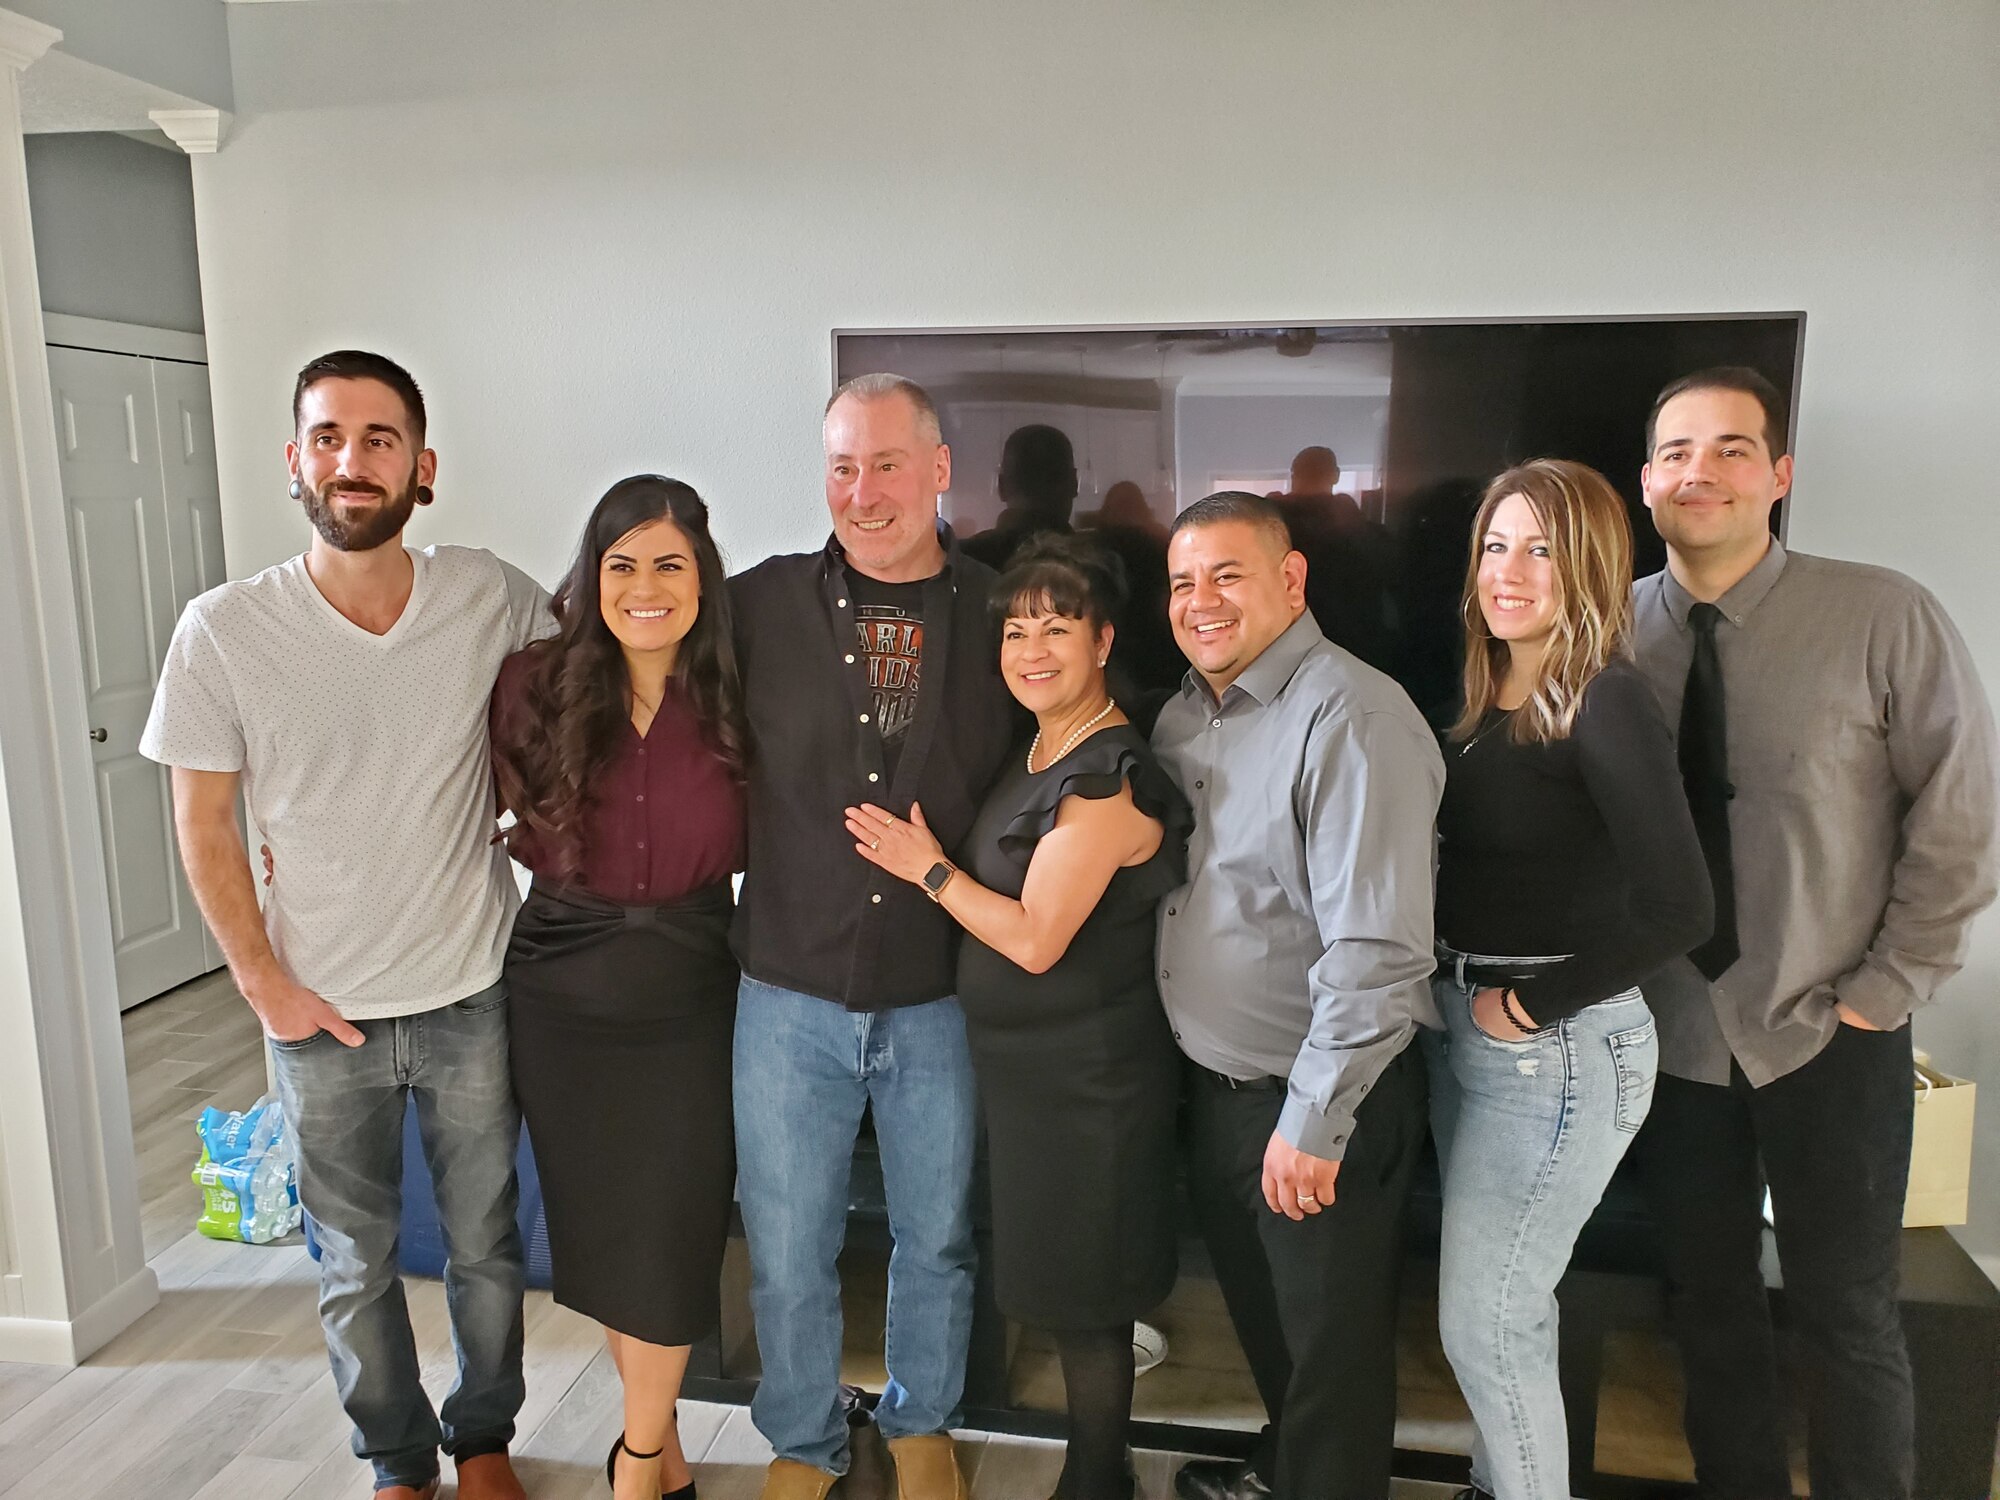 Grant and Christina Schaber pose with their sons and daughters during a January 2020 family event. (Left to right) Michael Schaber, Holly Griego, Grant Schaber, Christina Schaber, Vicente Limon, Asia Kilgore, and Joshua Schaber.